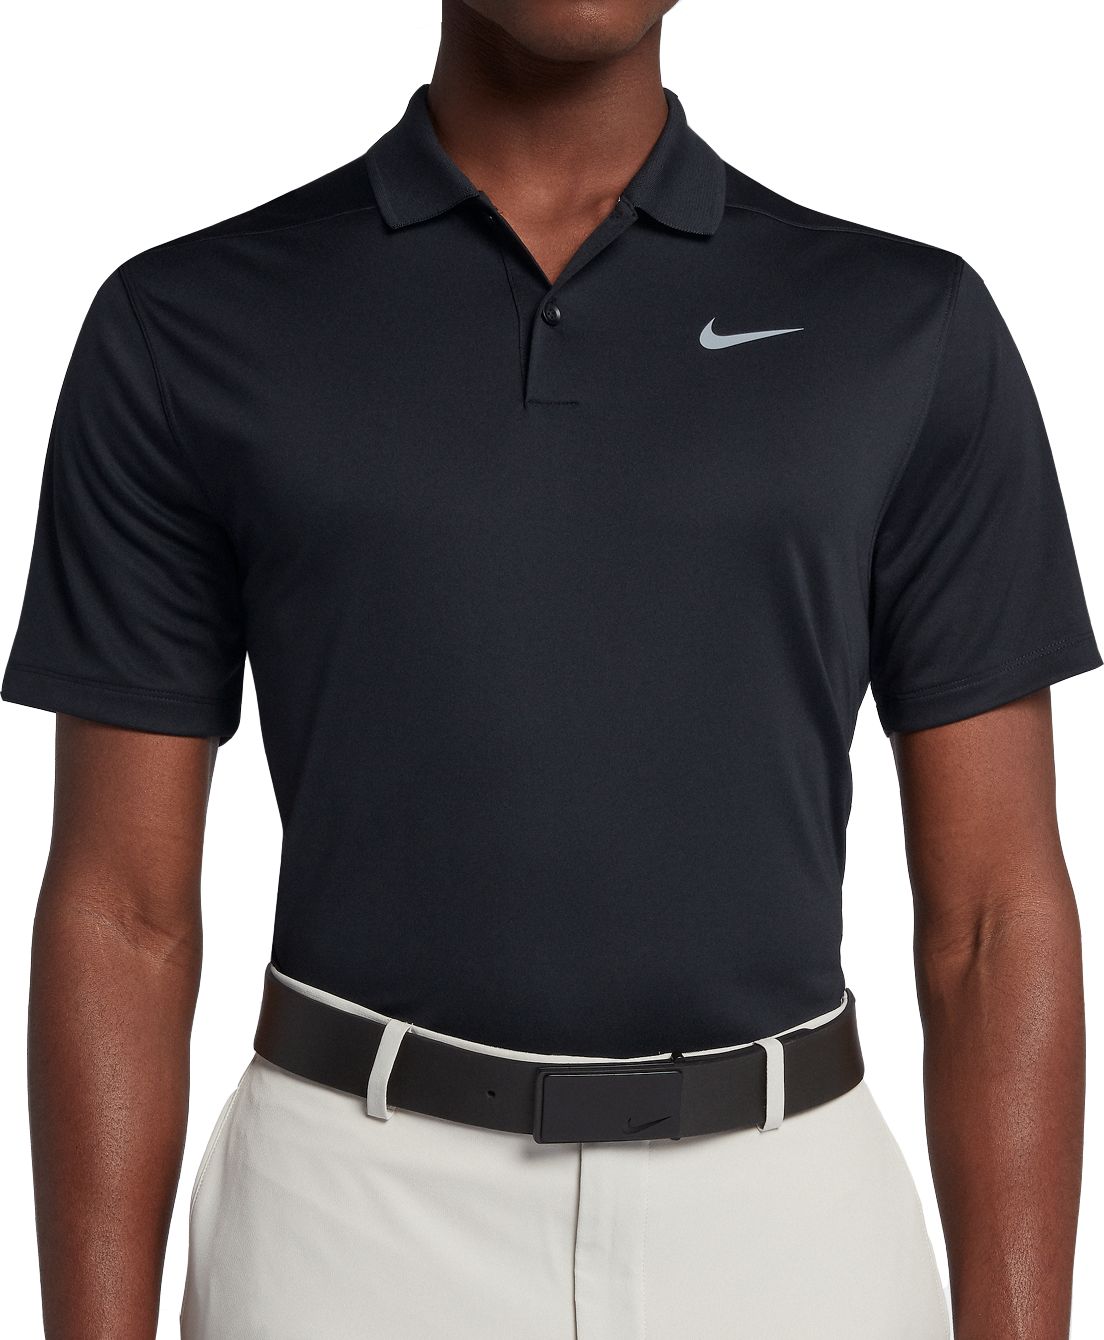 Nike Men's Solid Dry Victory Golf Polo 